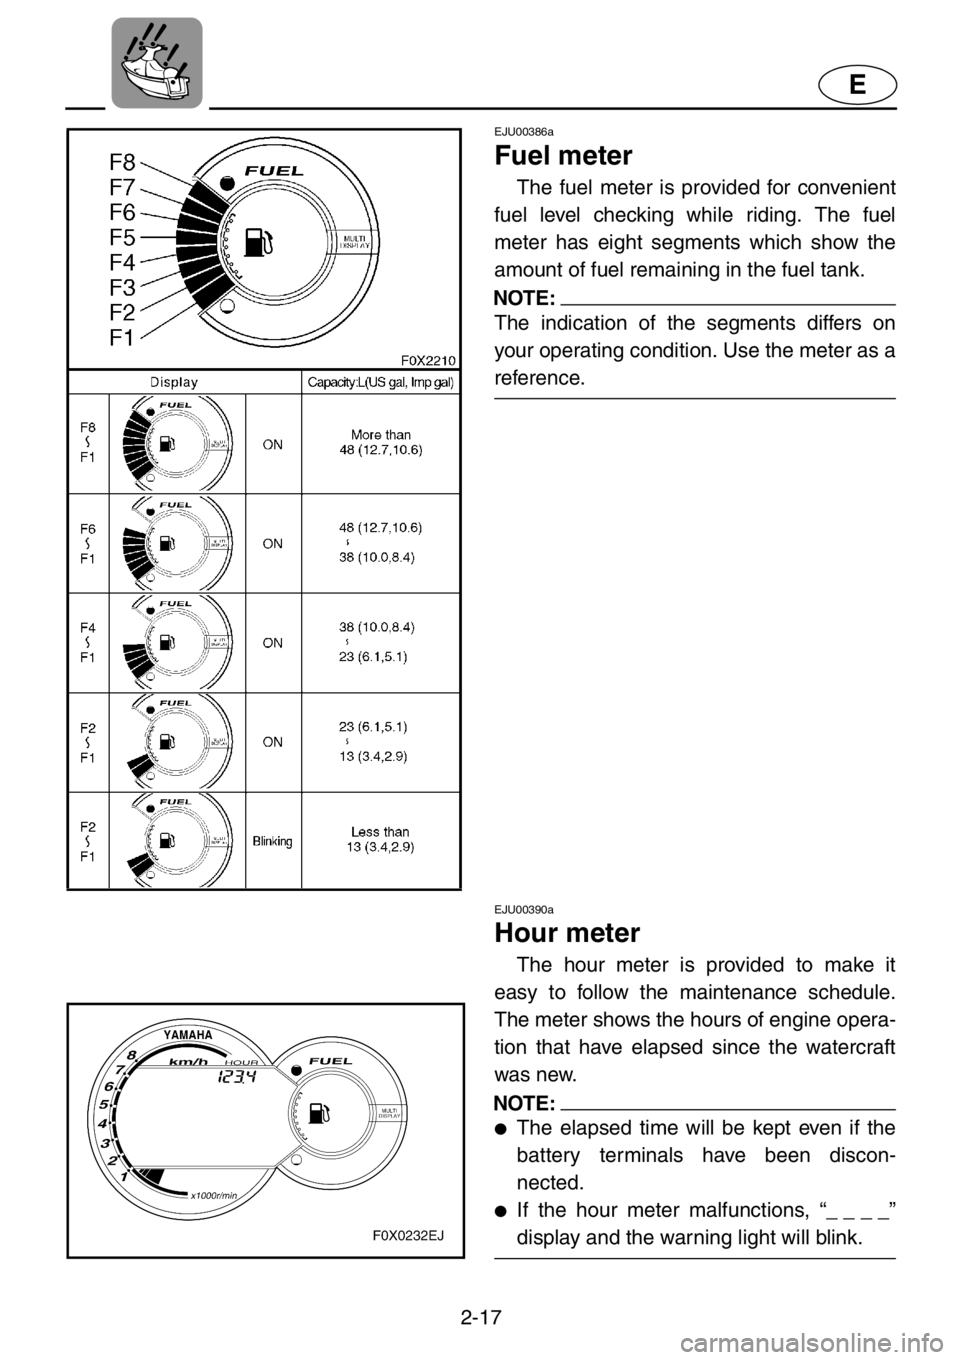 YAMAHA GP1200 2001  Owners Manual 2-17
E
EJU00386a
Fuel meter
The fuel meter is provided for convenient
fuel level checking while riding. The fuel
meter has eight segments which show the
amount of fuel remaining in the fuel tank.
NOTE